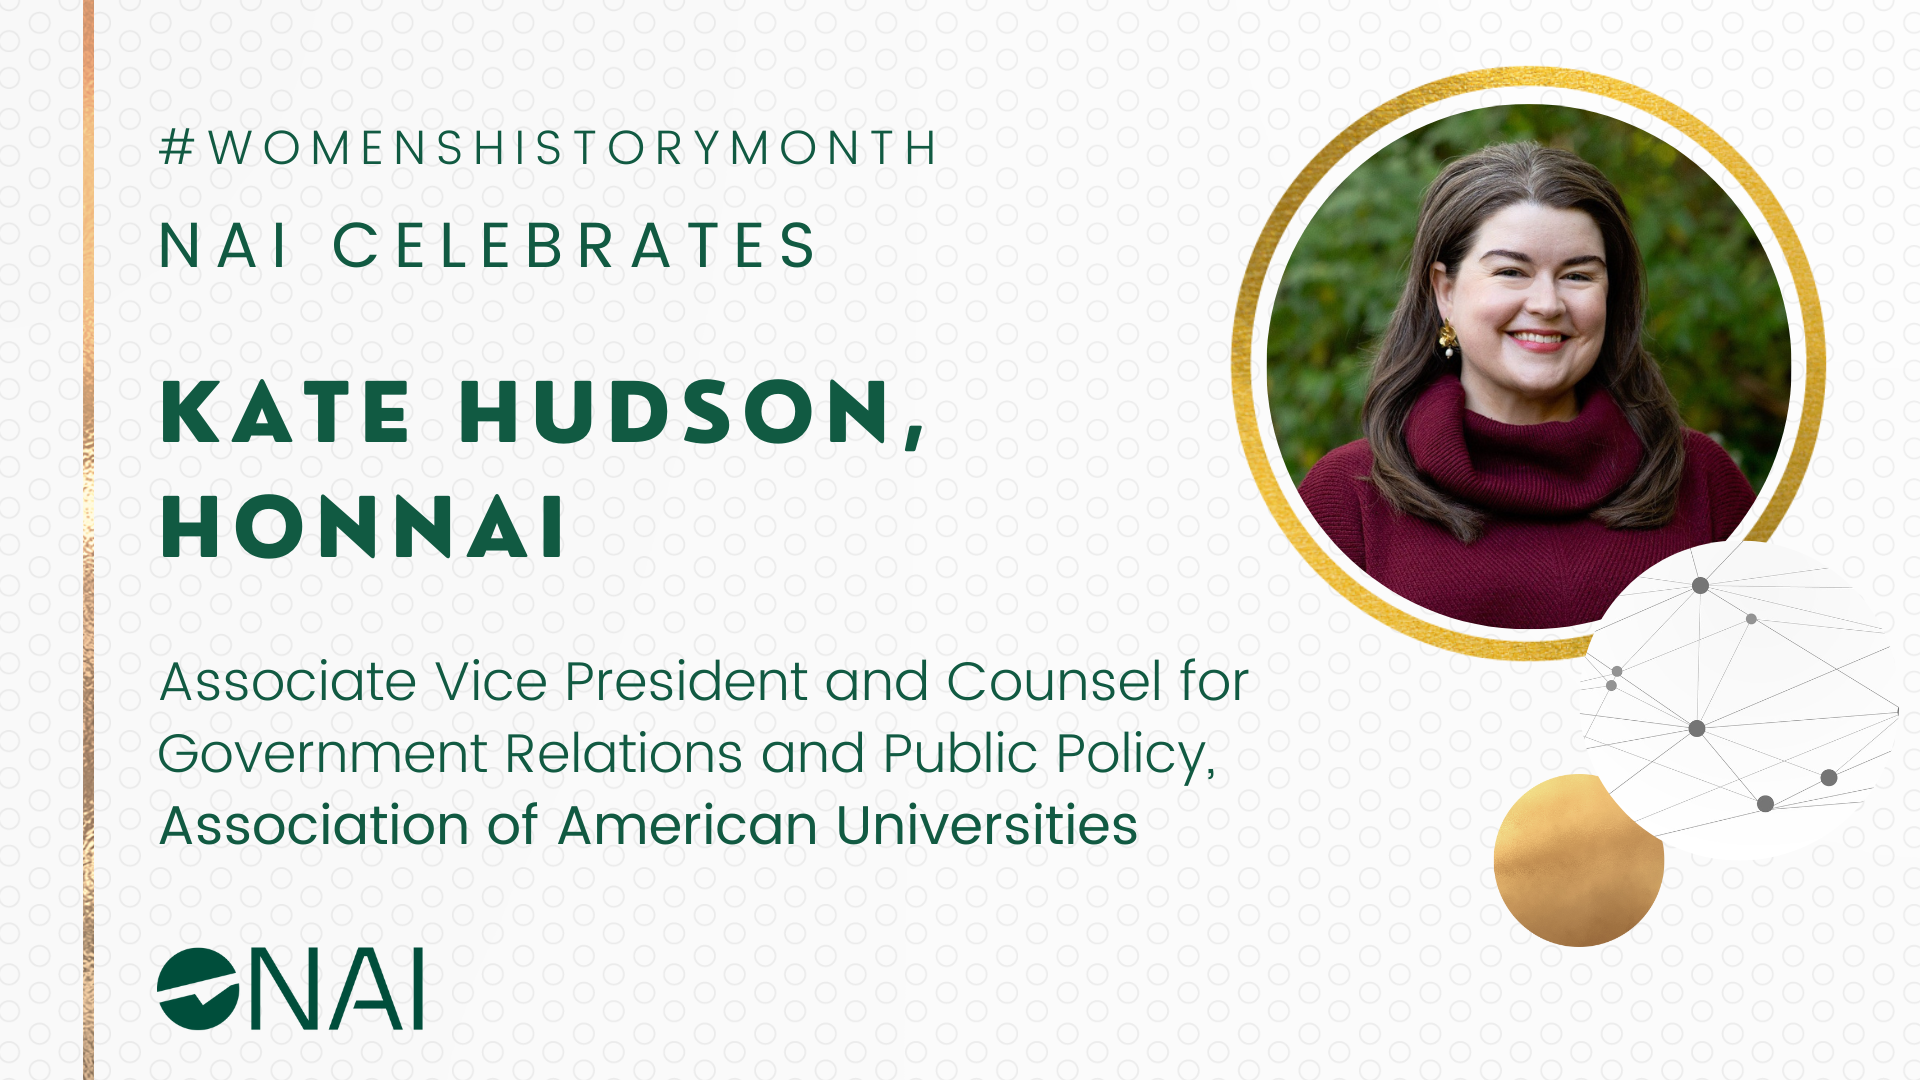 A graphic with a headshot of Kate Hudson, HonNAI with the text “#WomensHistoryMonth NAI celebrates Kate Hudson, HonNAI” followed by “Associate Vice President and Counsel for Government Relations and Public Policy, Association of American Universities”.